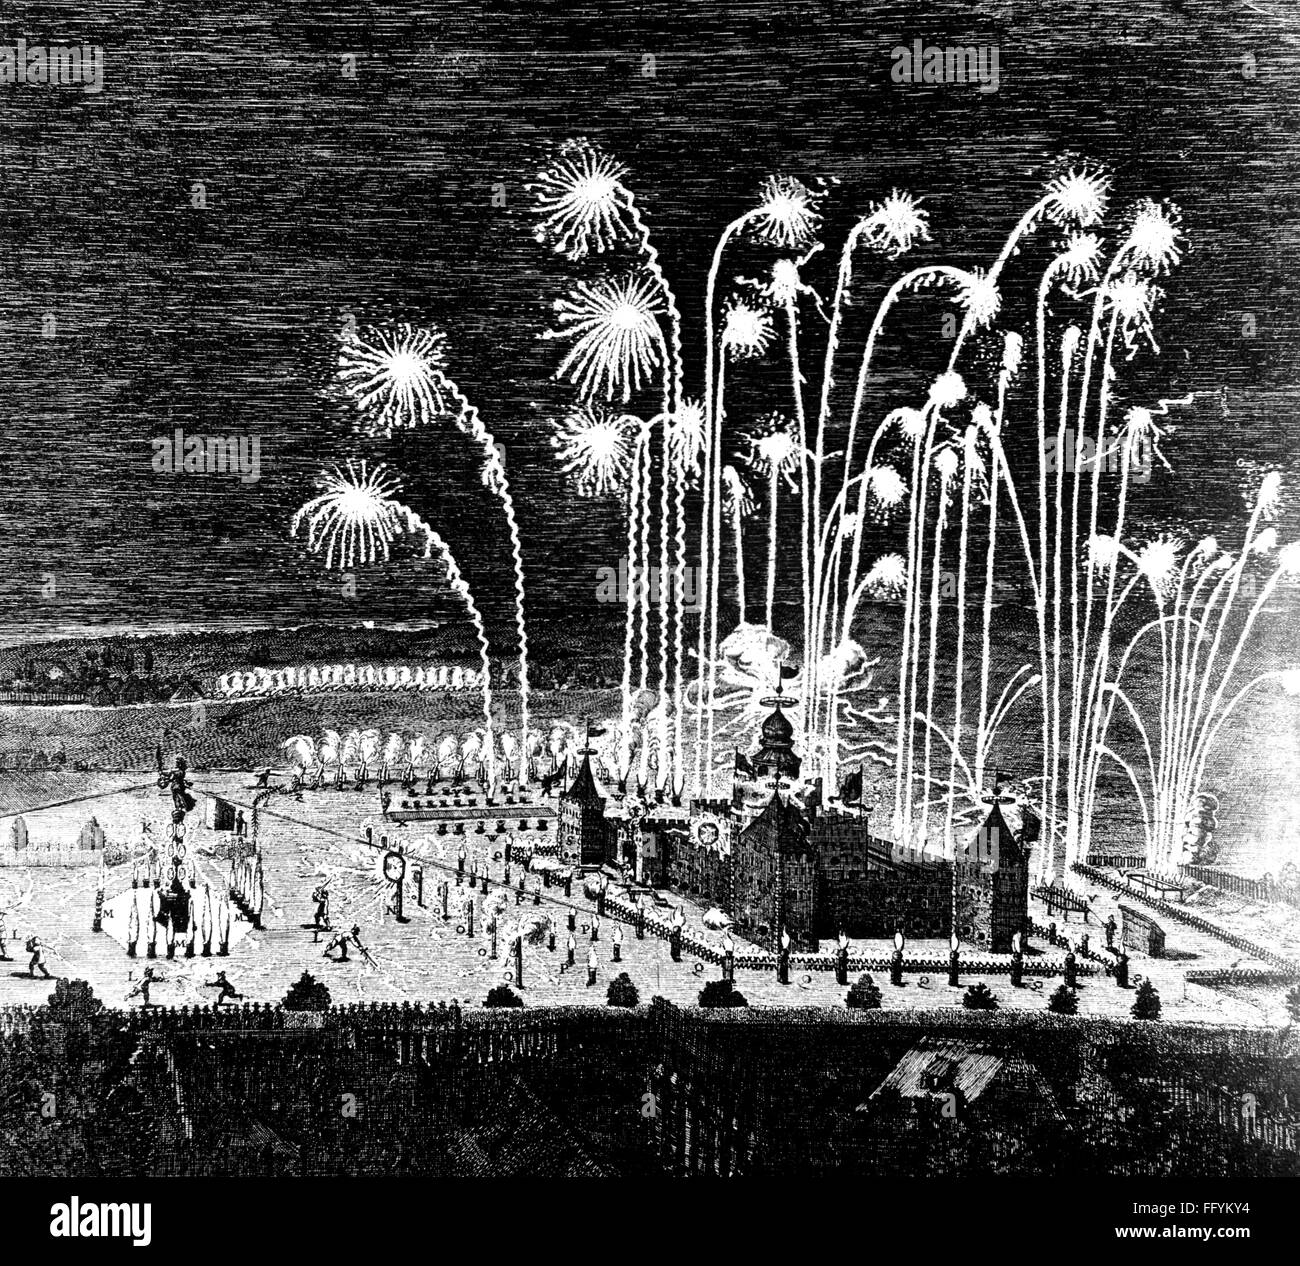 festivities, fireworks, fireworks on the occasion of the ratification of the definite version of the Westphalian peace in Nuremberg, 25.9.1649, engraving, by Michael Herz, detail, 1650, 17th century, graphic, graphics, Germany, Thirty Years' War, peace, peace agreement, peace treaty, peace agreements, peace treaties, ratification, ratifications, Peace of Westphalia, castle, castles, fireworks, rocket, missile, rockets, missiles, historic, historical, people, Additional-Rights-Clearences-Not Available Stock Photo